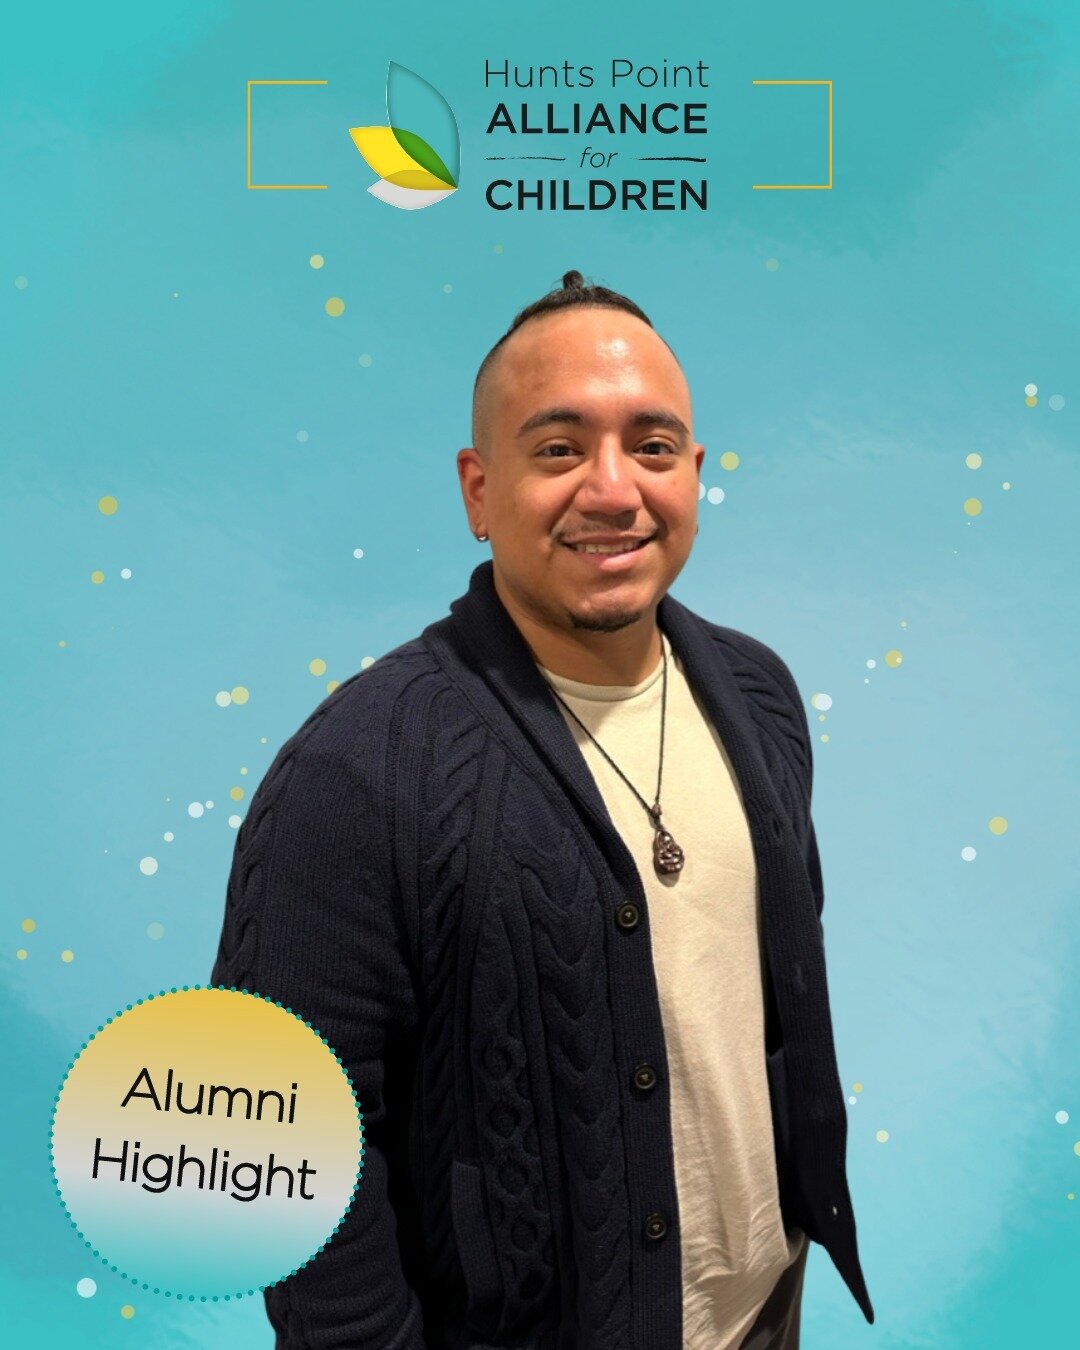 As each year passes we get to watch our scholars graduate and grow into successful professionals giving back to their communities. For our 15-year anniversary, we are checking in with some of our incredible alumni, like Tony Muentes, our first Alumni